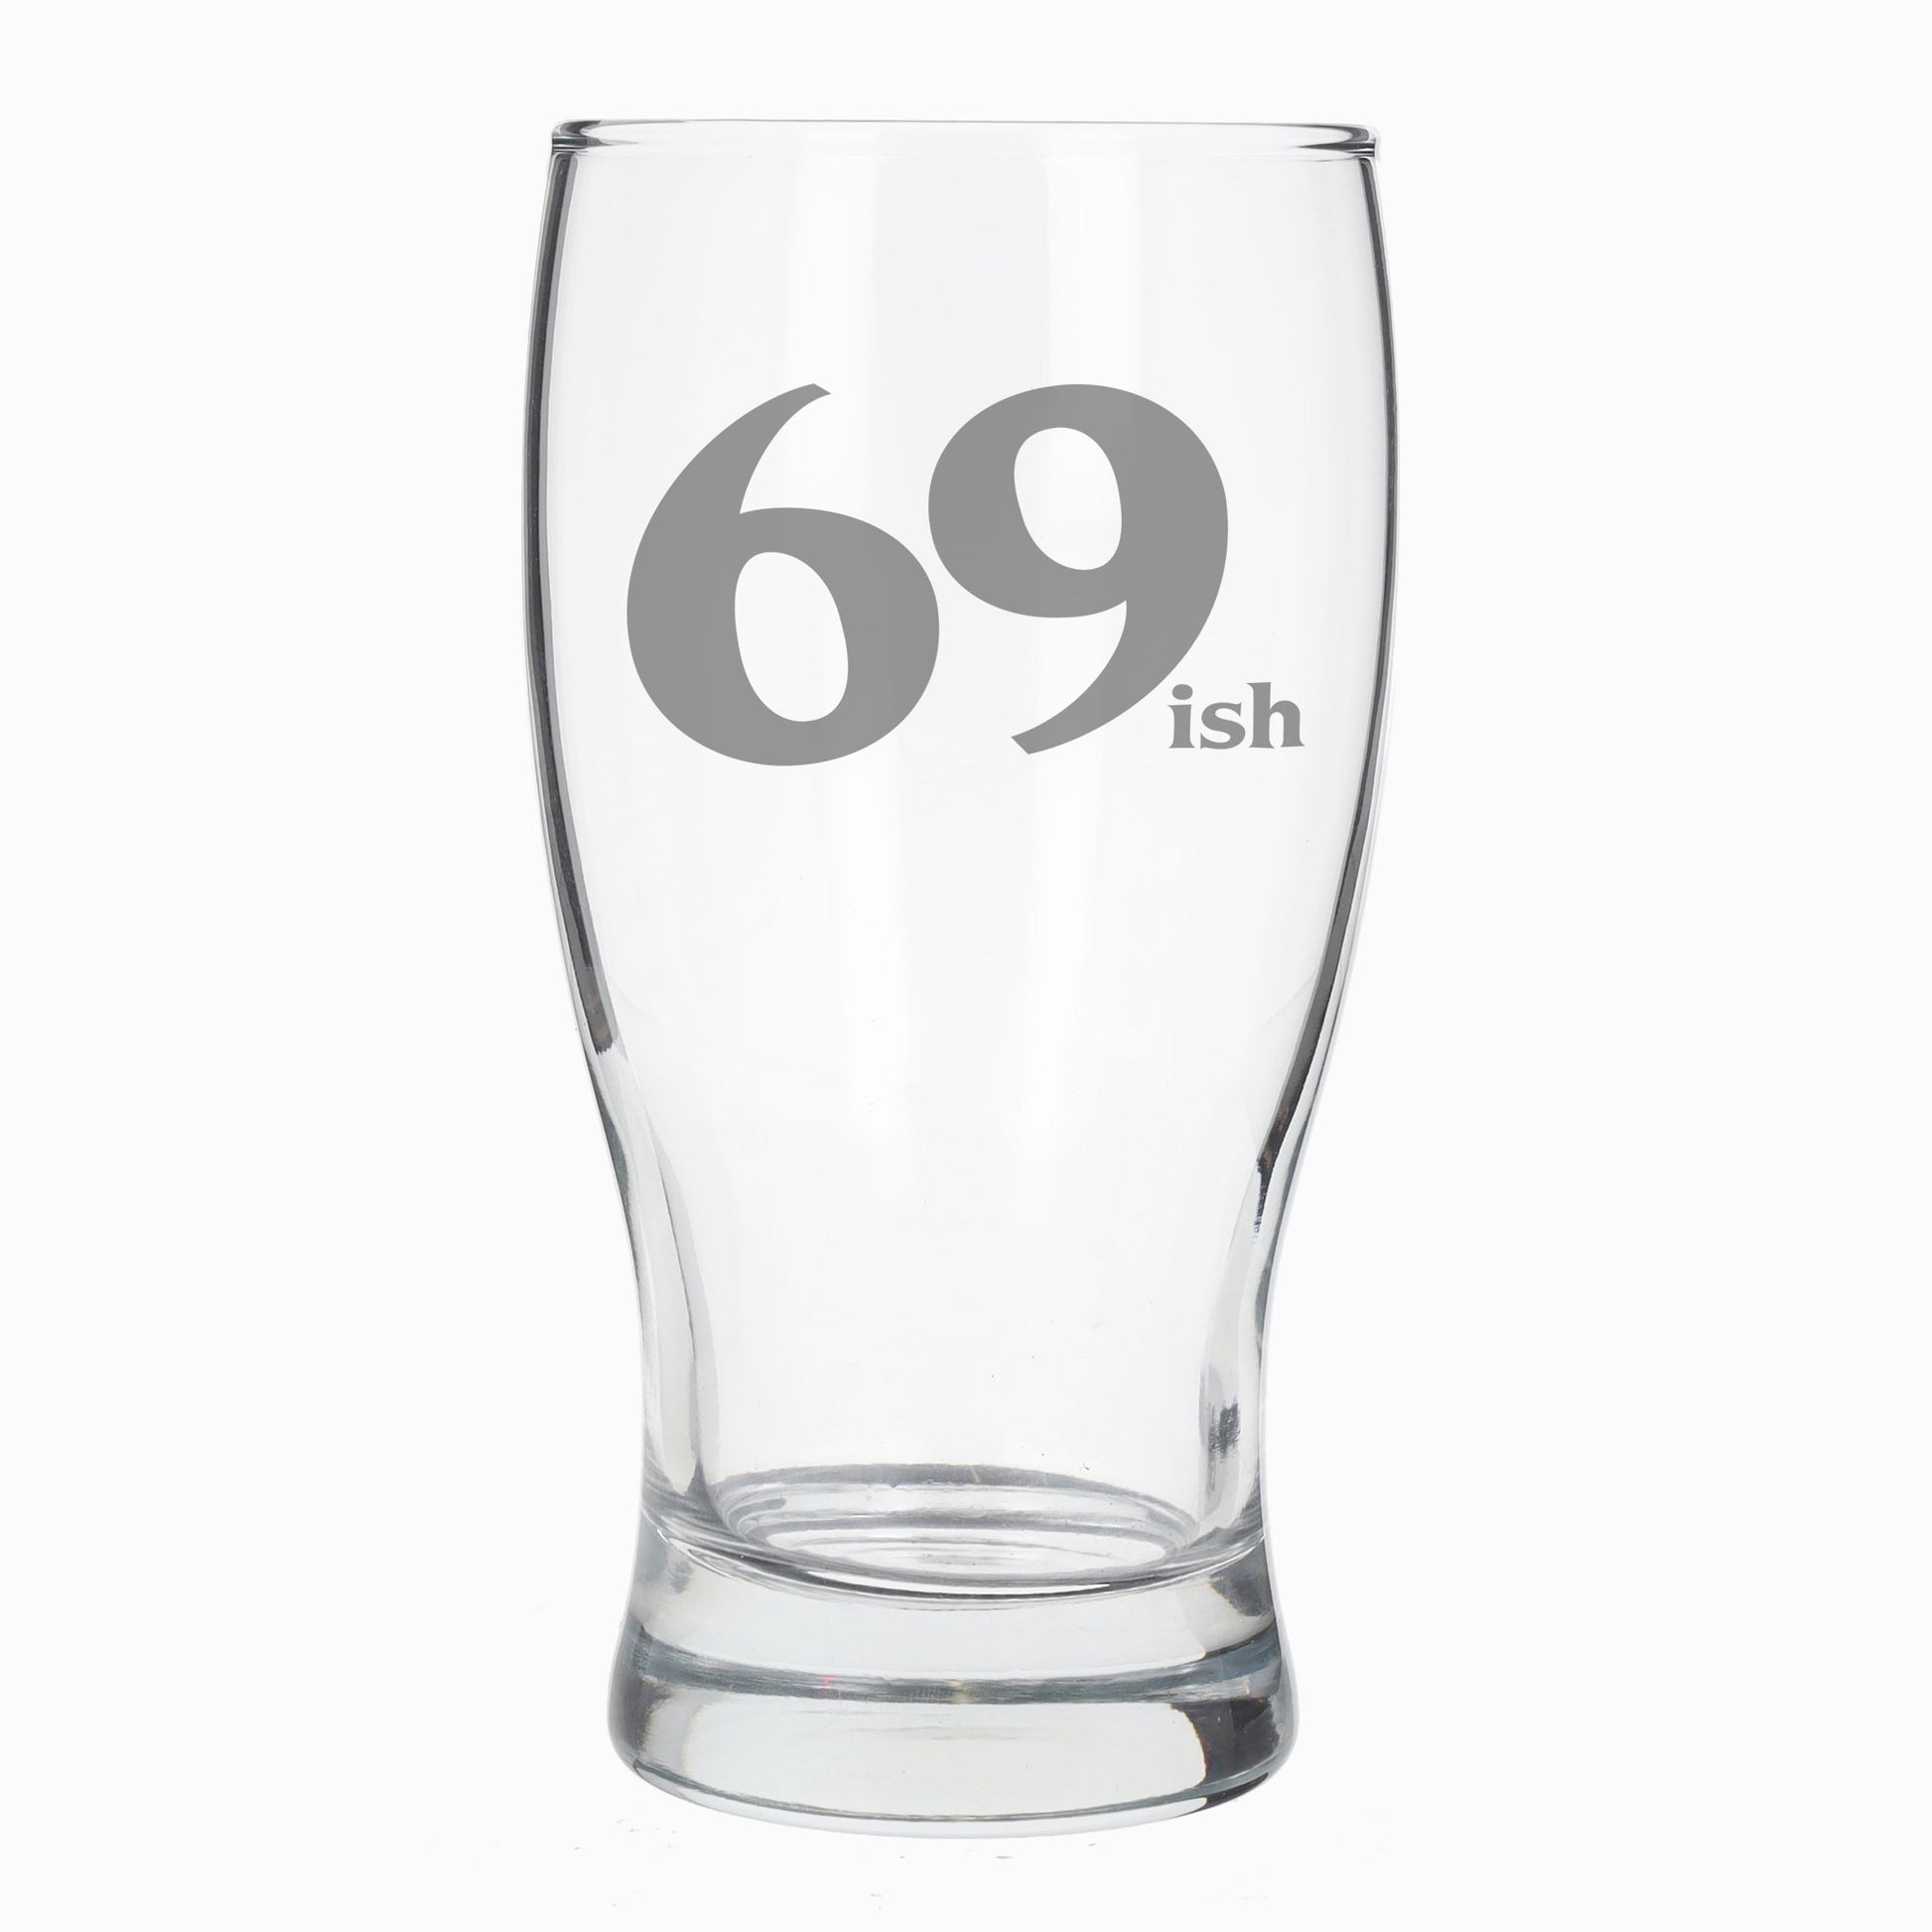 69ish Pint Glass and/or Coaster Set  - Always Looking Good - Pint Glass On Its Own  